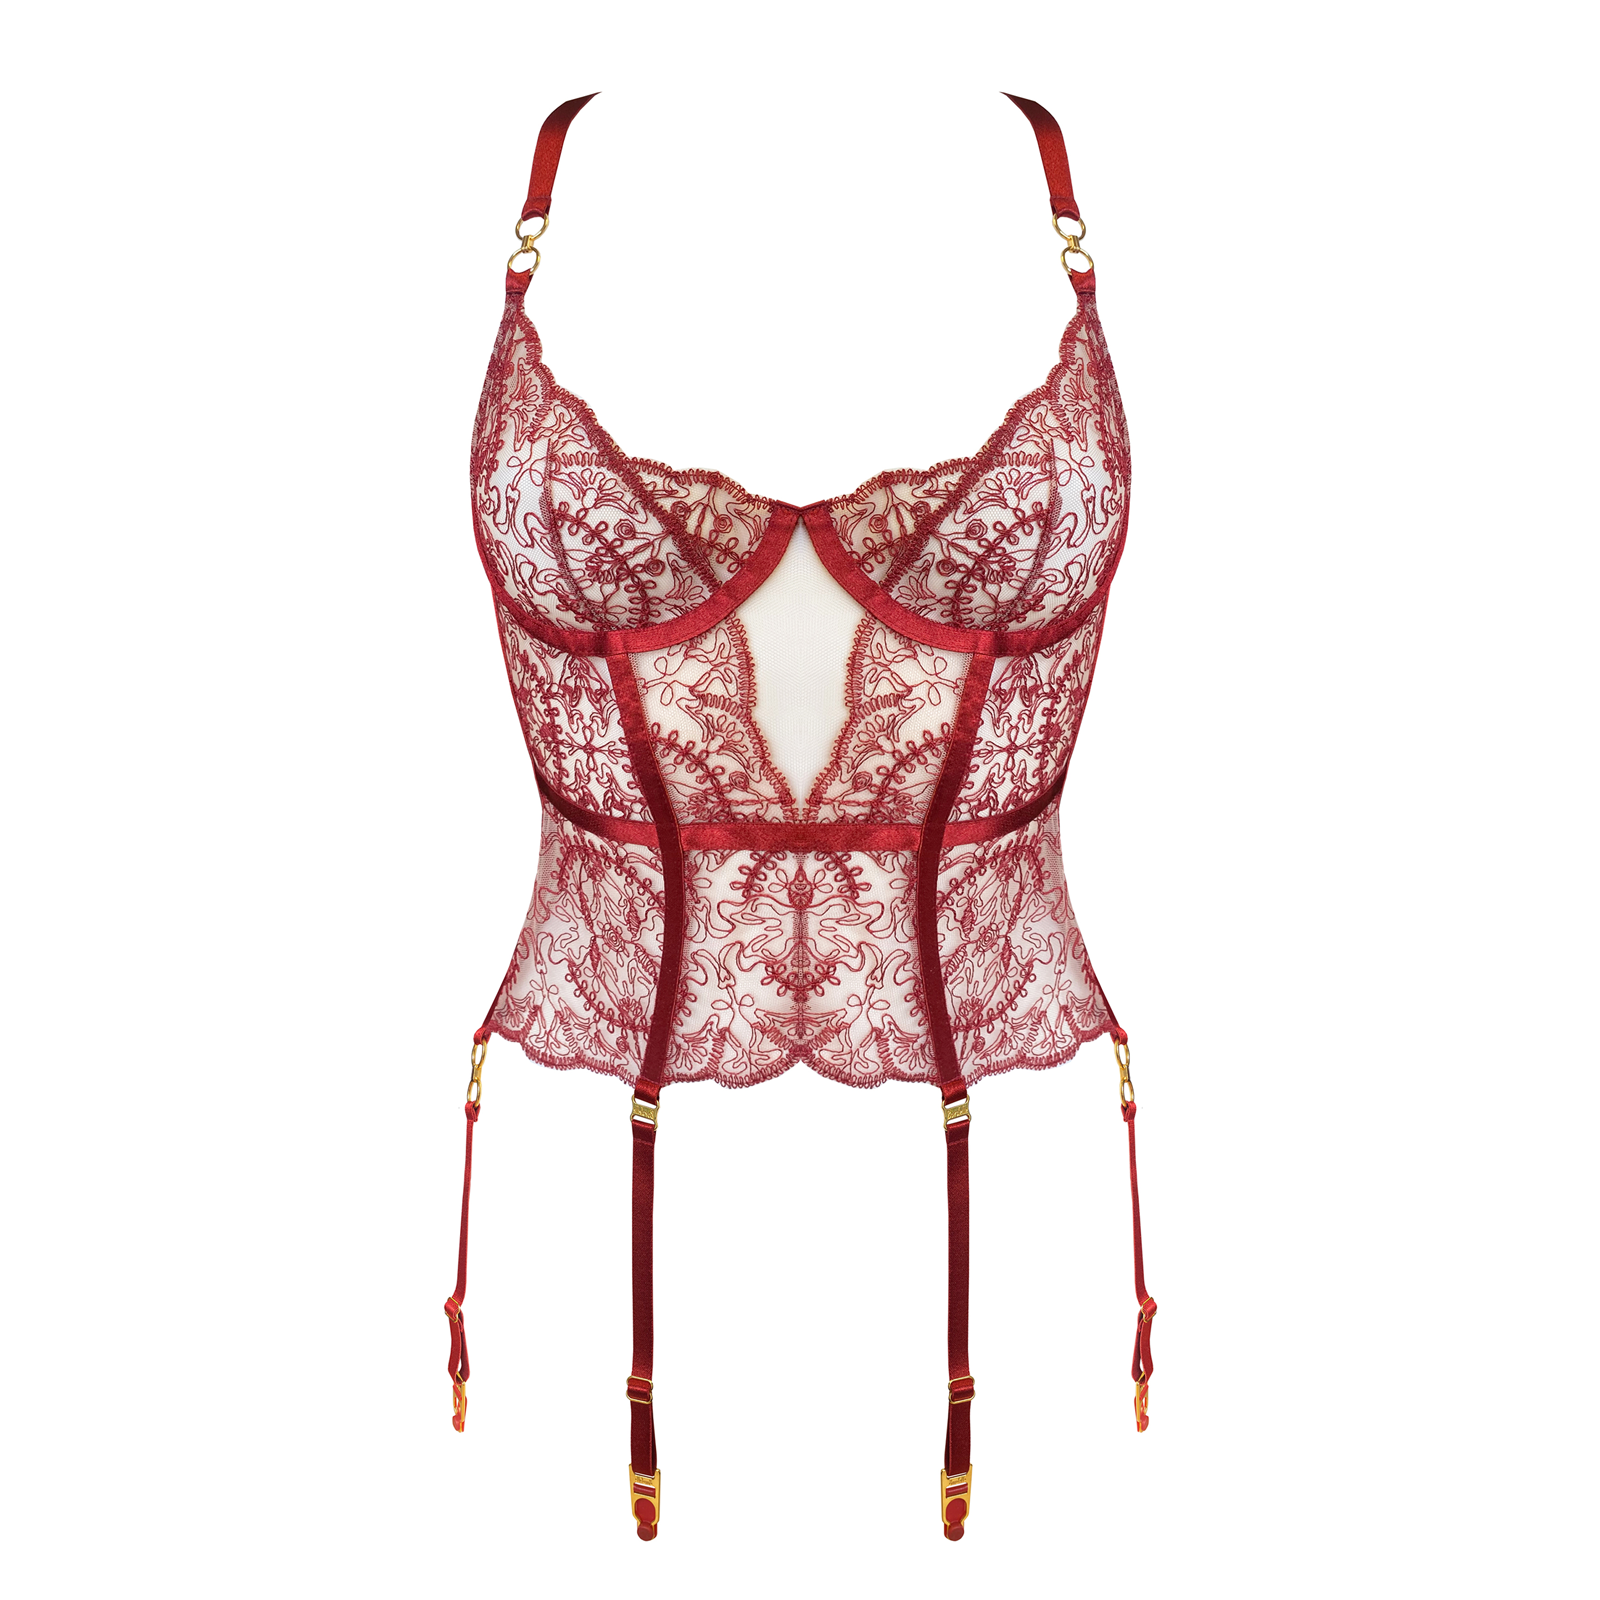 Cymatic basque by Bordelle - red